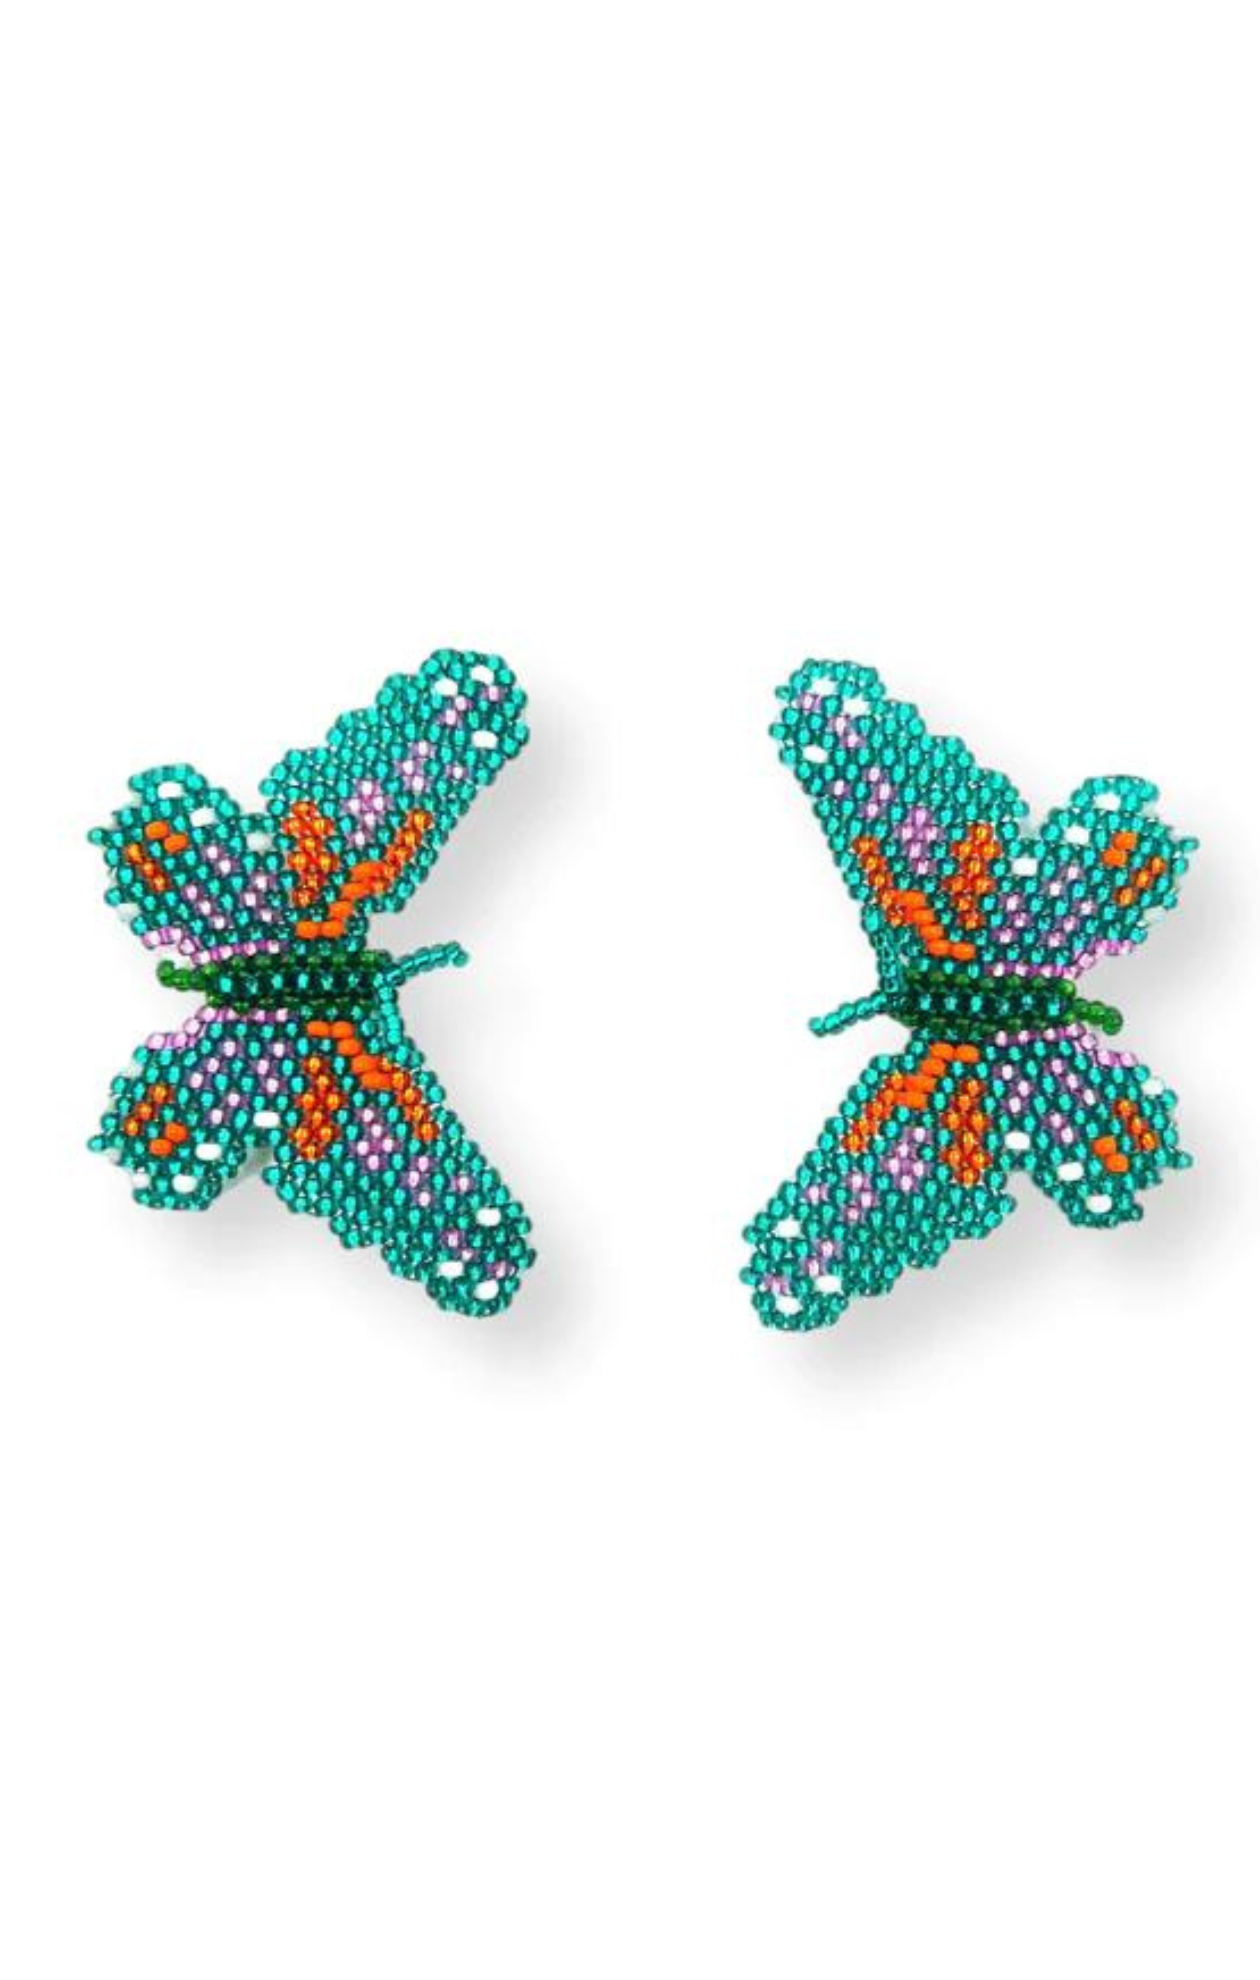 Papillon Earrings, hand beaded in Colombia.